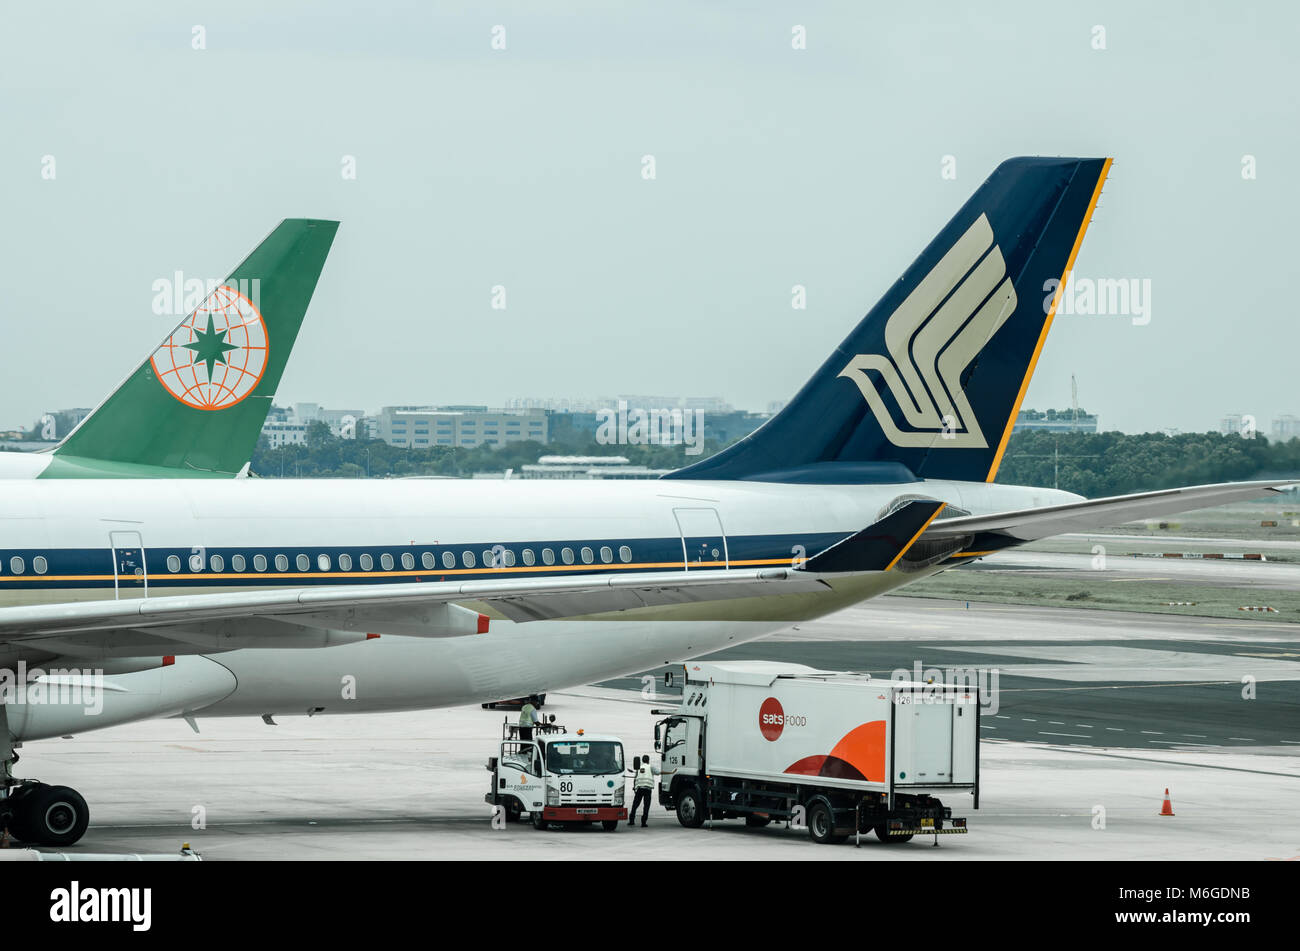 Singapore Airlines is the flag carrier airline of Singapore with its hub at Singapore Changi Airport. The airline was famous for its top notch service Stock Photo